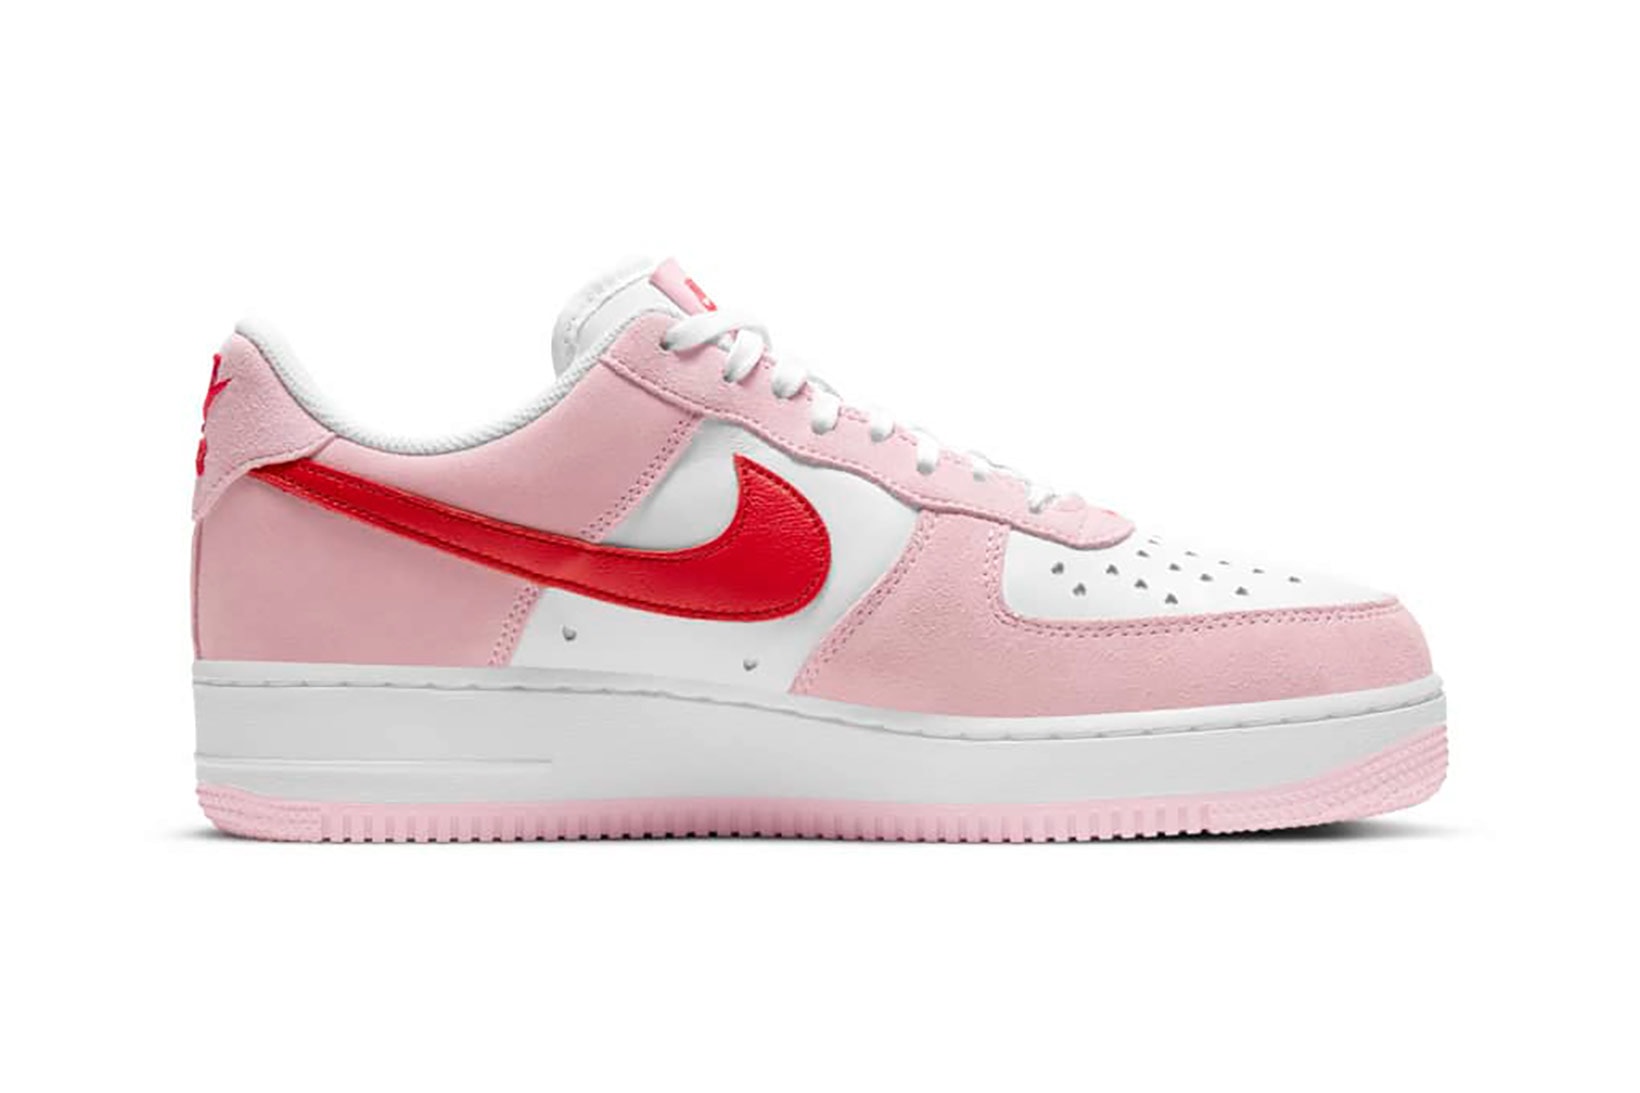 nike air force 1 af1 07 valentines day sneakers pink red white shoes footwear kicks sneakerhead lateral